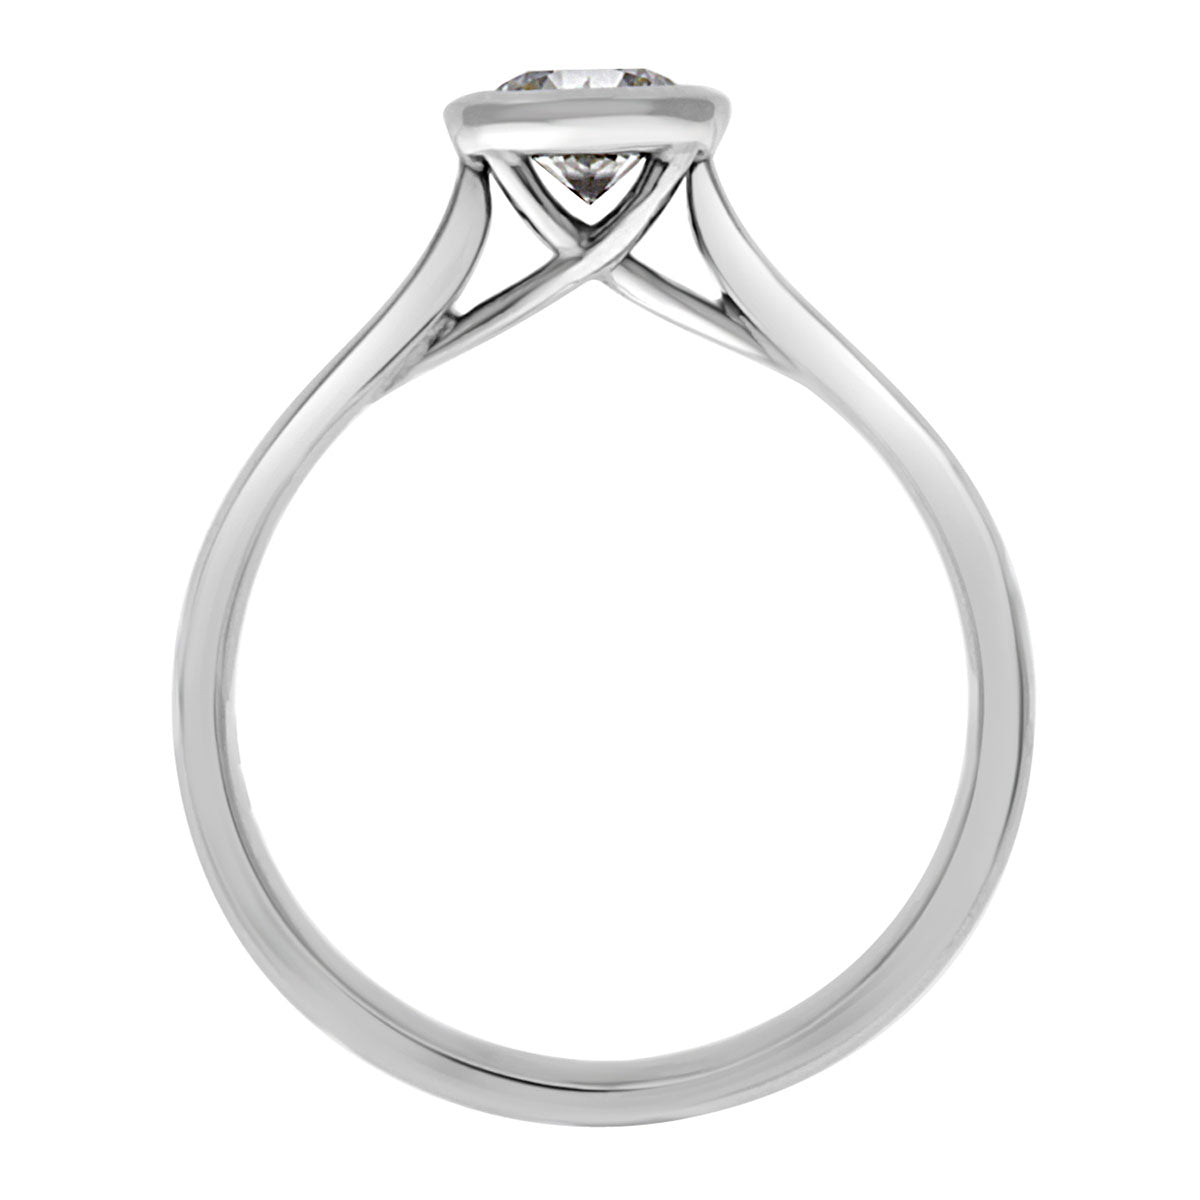 Bezel Set Engagement ring in white gold in upstanding view